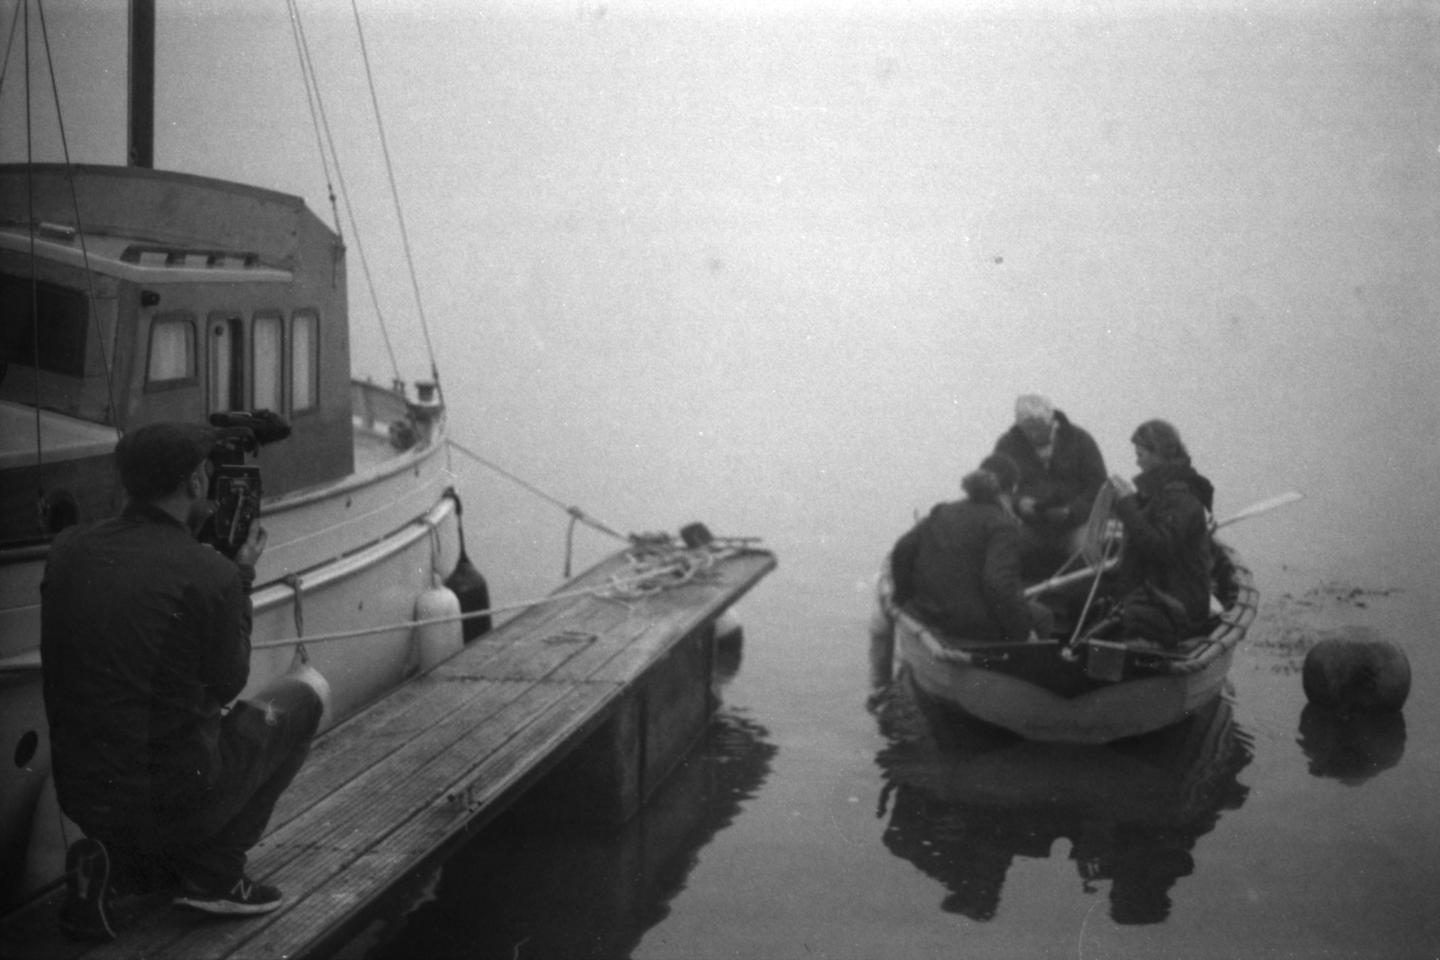 A man on a jetty holding a film camera, filming three people in a small rowing boat, leaving the jetty.